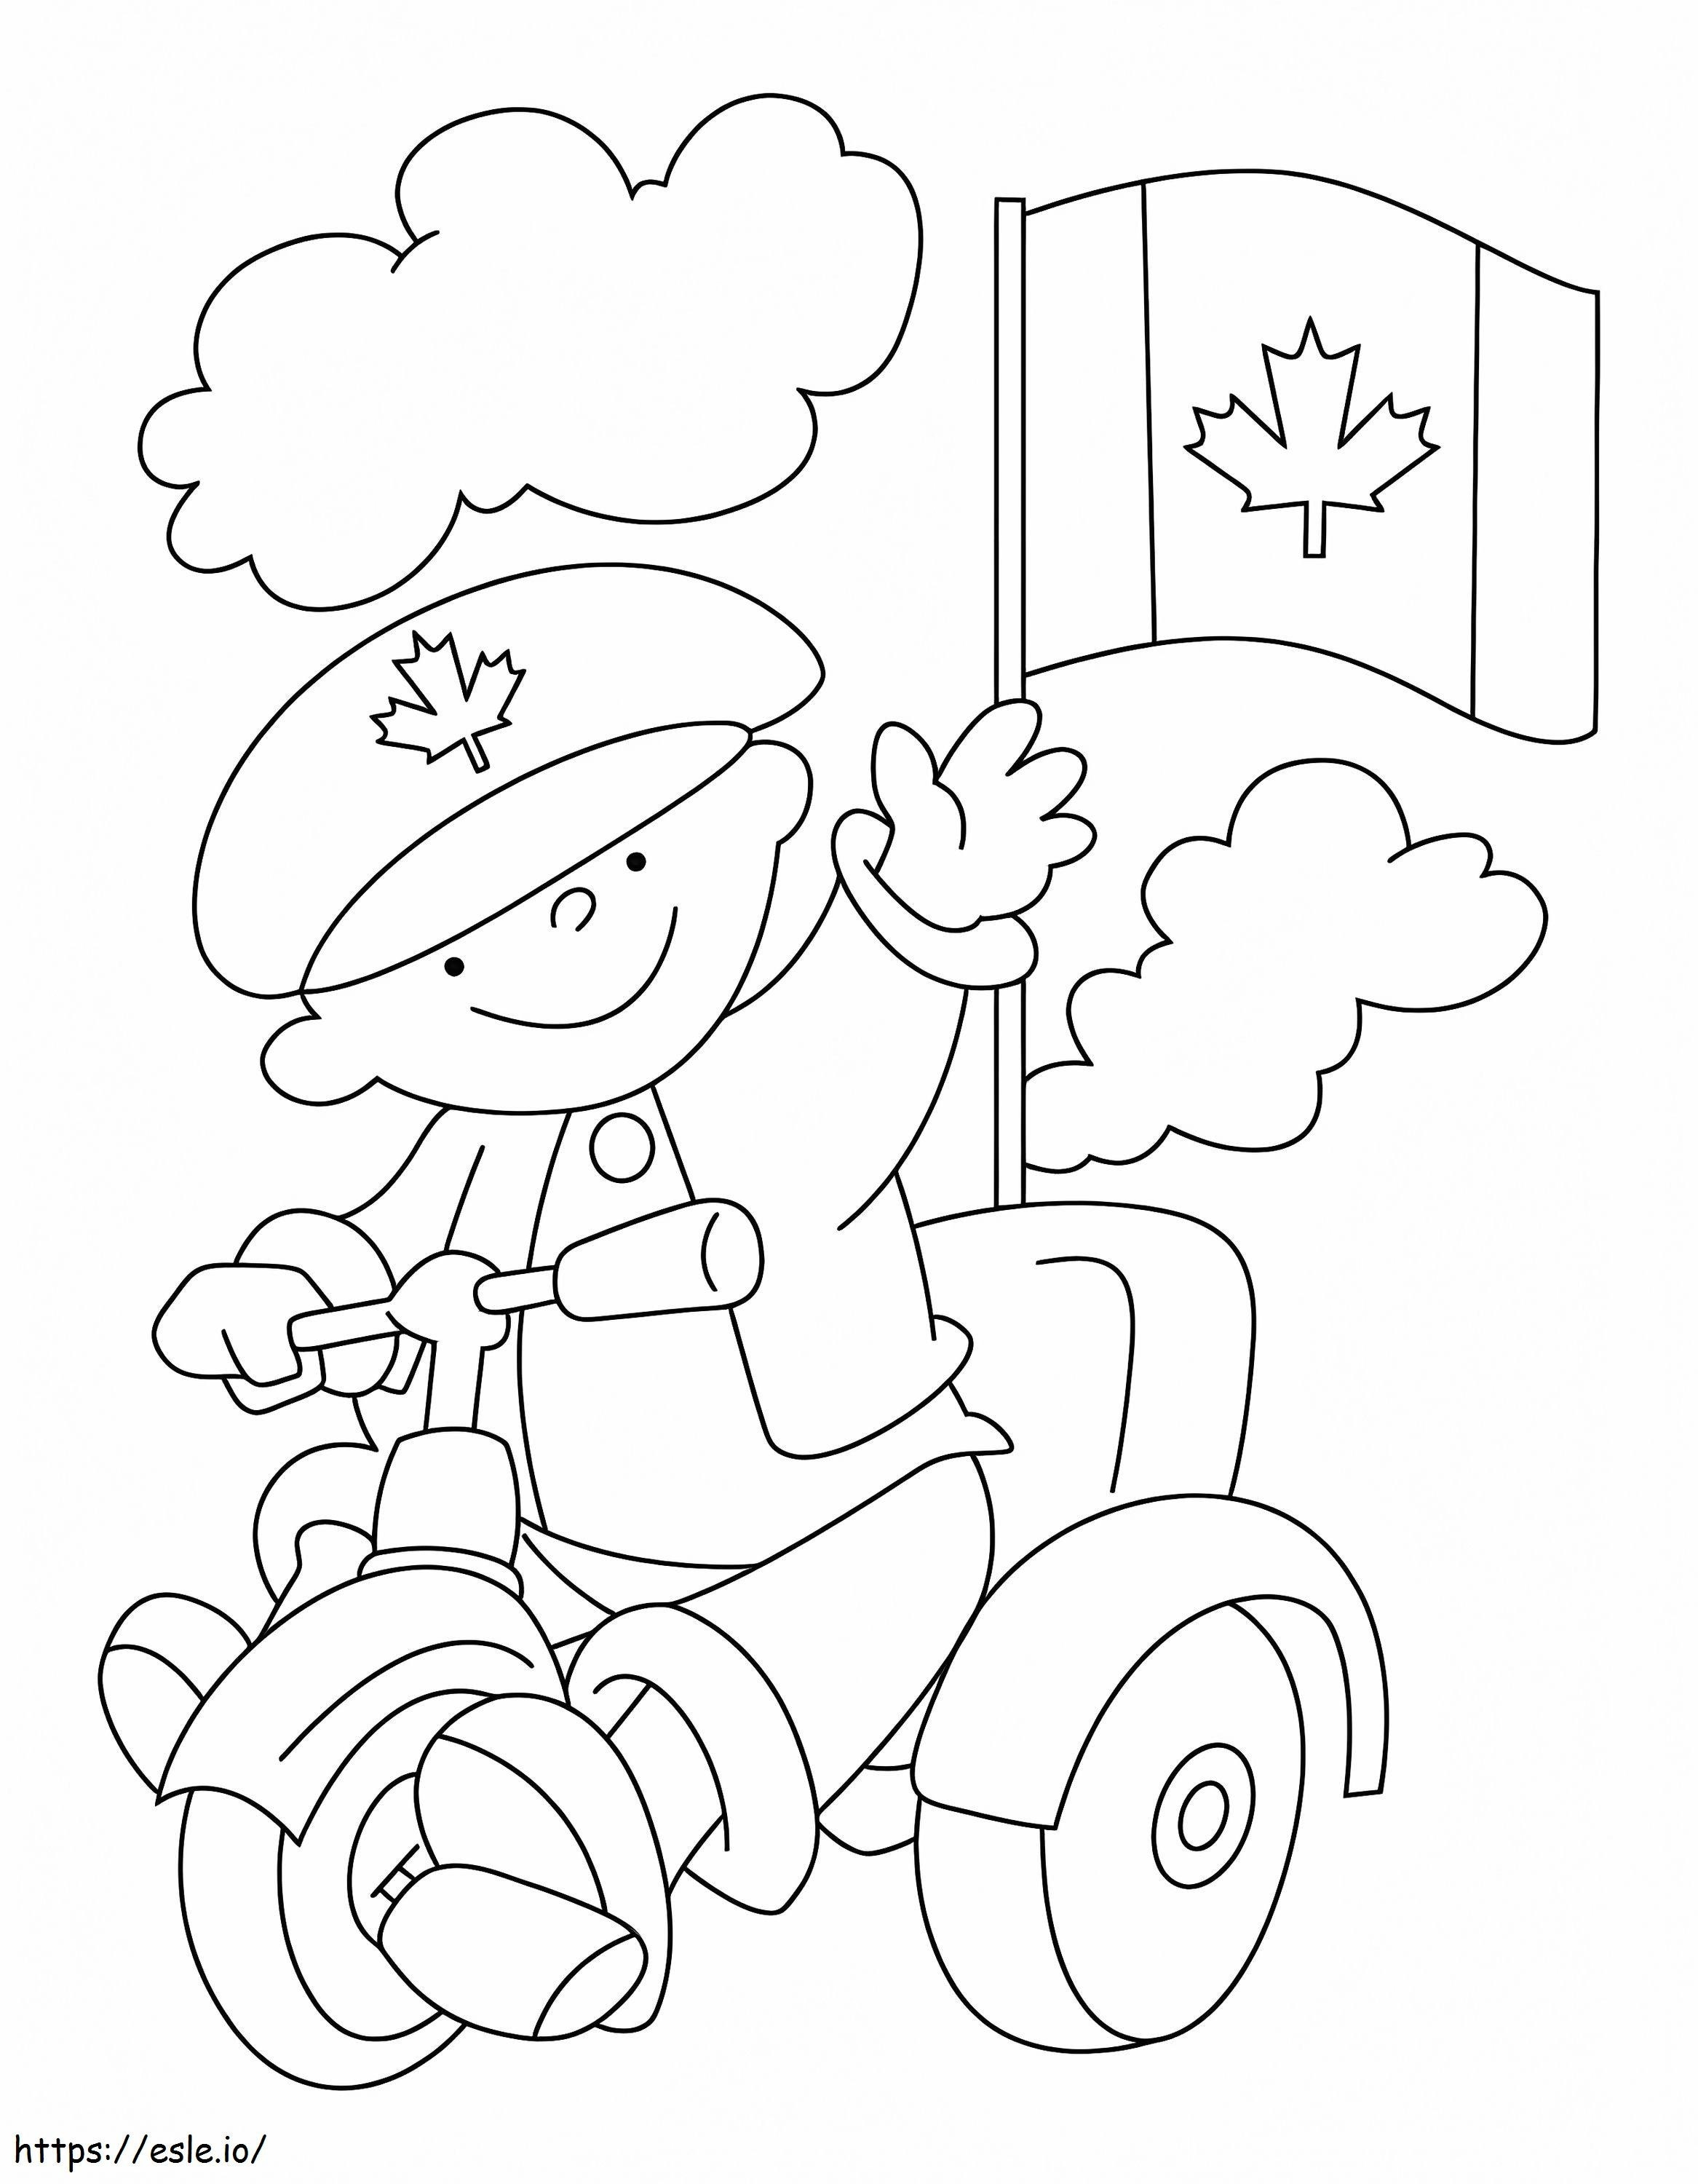 Happy Canada Day 1 coloring page